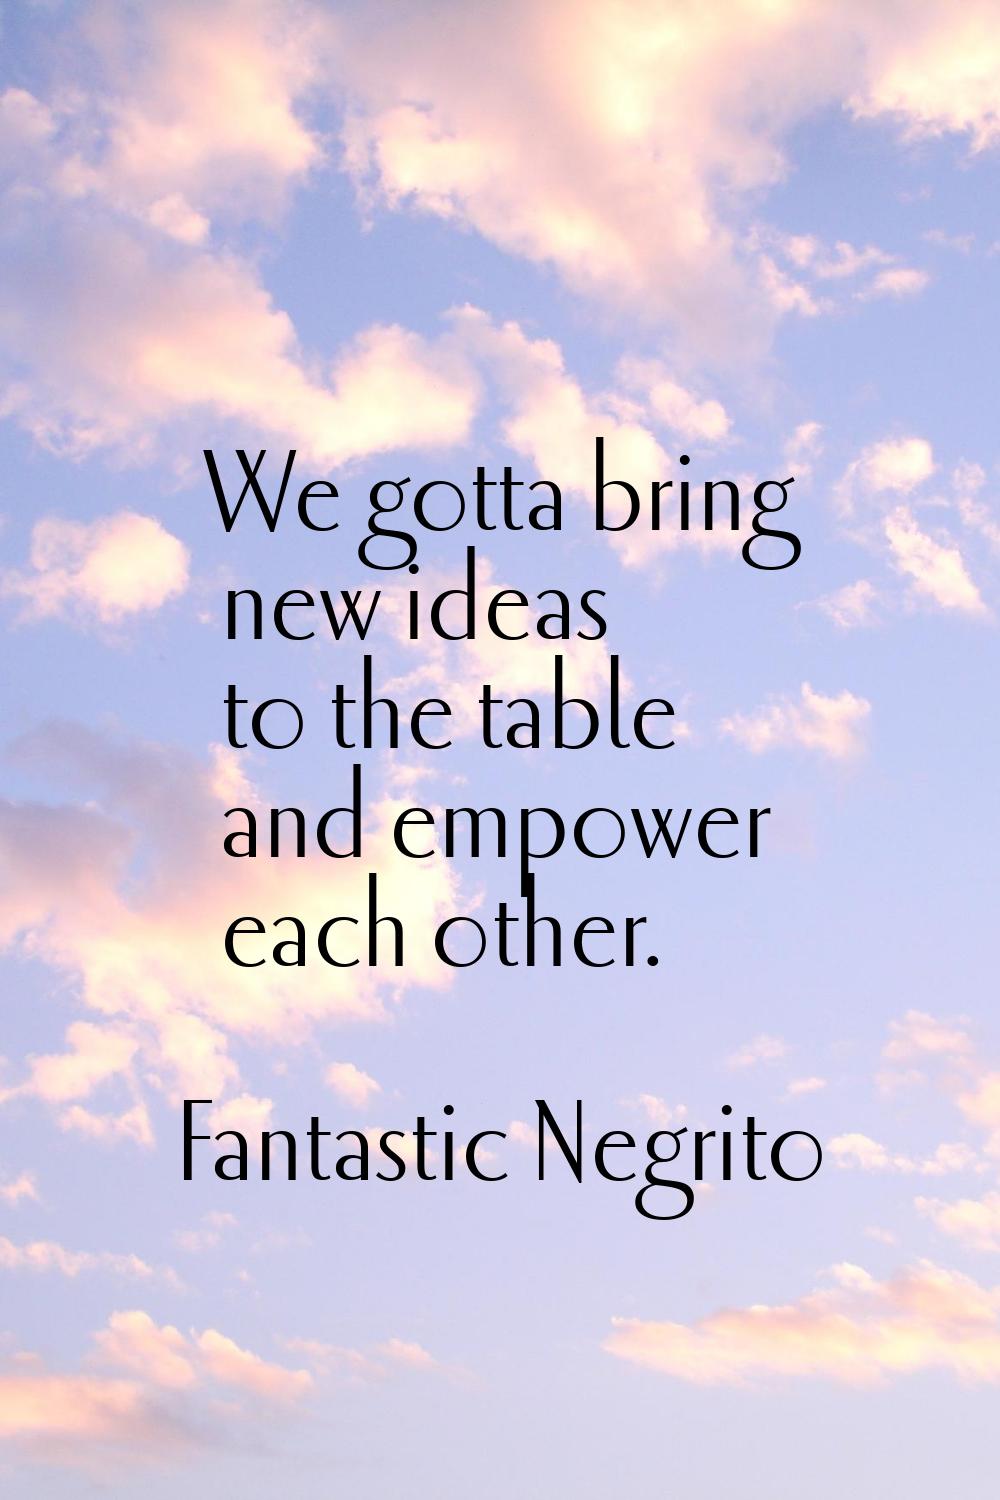 We gotta bring new ideas to the table and empower each other.